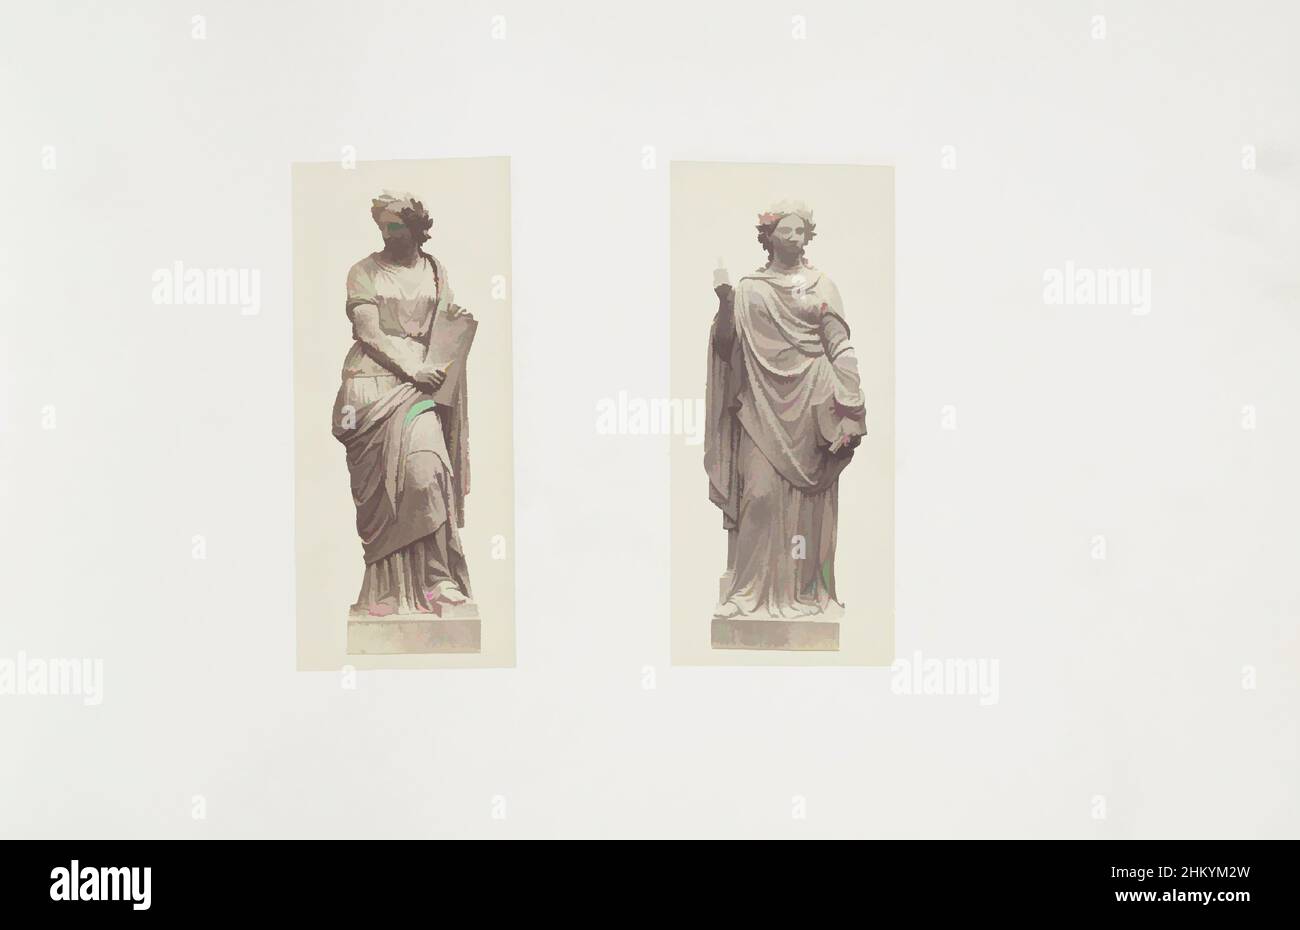 Art inspired by Plaster models for sculptures at the Palais du Louvre: left La Gravure by Jules Droz and right La Peinture by Jean Louis Nicolas Jaley, Part of Réunion des Tuileries au Louvre 1852-1857, album 3., Édouard Denis Baldus, Jules-Antoine Droz, Paris, c. 1855 - c. 1857, paper, Classic works modernized by Artotop with a splash of modernity. Shapes, color and value, eye-catching visual impact on art. Emotions through freedom of artworks in a contemporary way. A timeless message pursuing a wildly creative new direction. Artists turning to the digital medium and creating the Artotop NFT Stock Photo